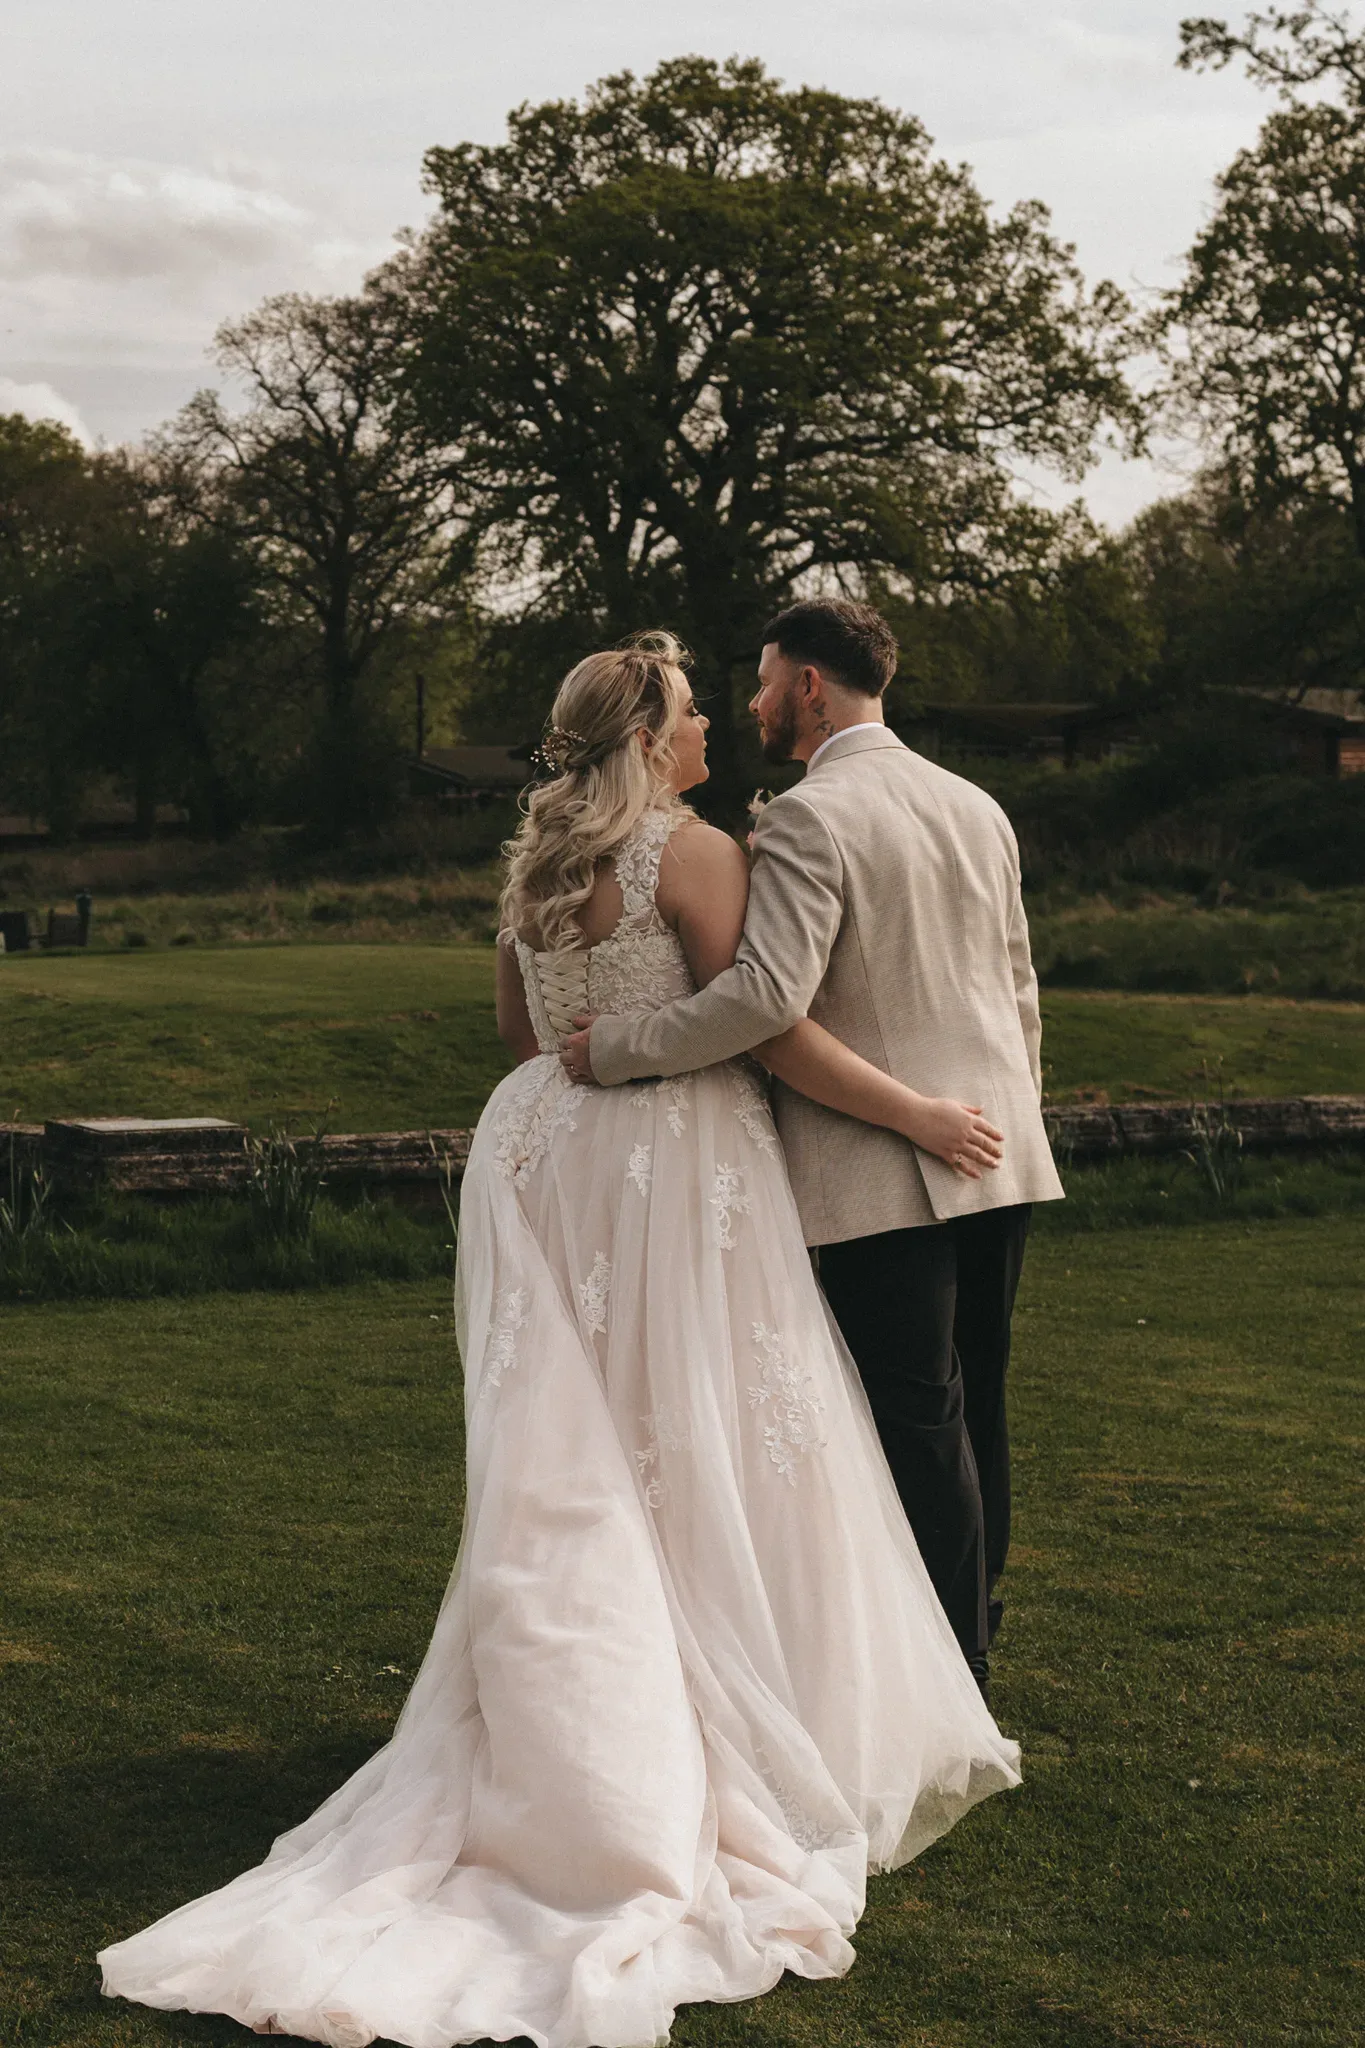 A bride and groom embrace outdoors, viewing a natural landscape. the bride's detailed white gown trails behind her, and the groom wears a light-colored suit. they stand on grass near a rustic fence, intimate and serene.